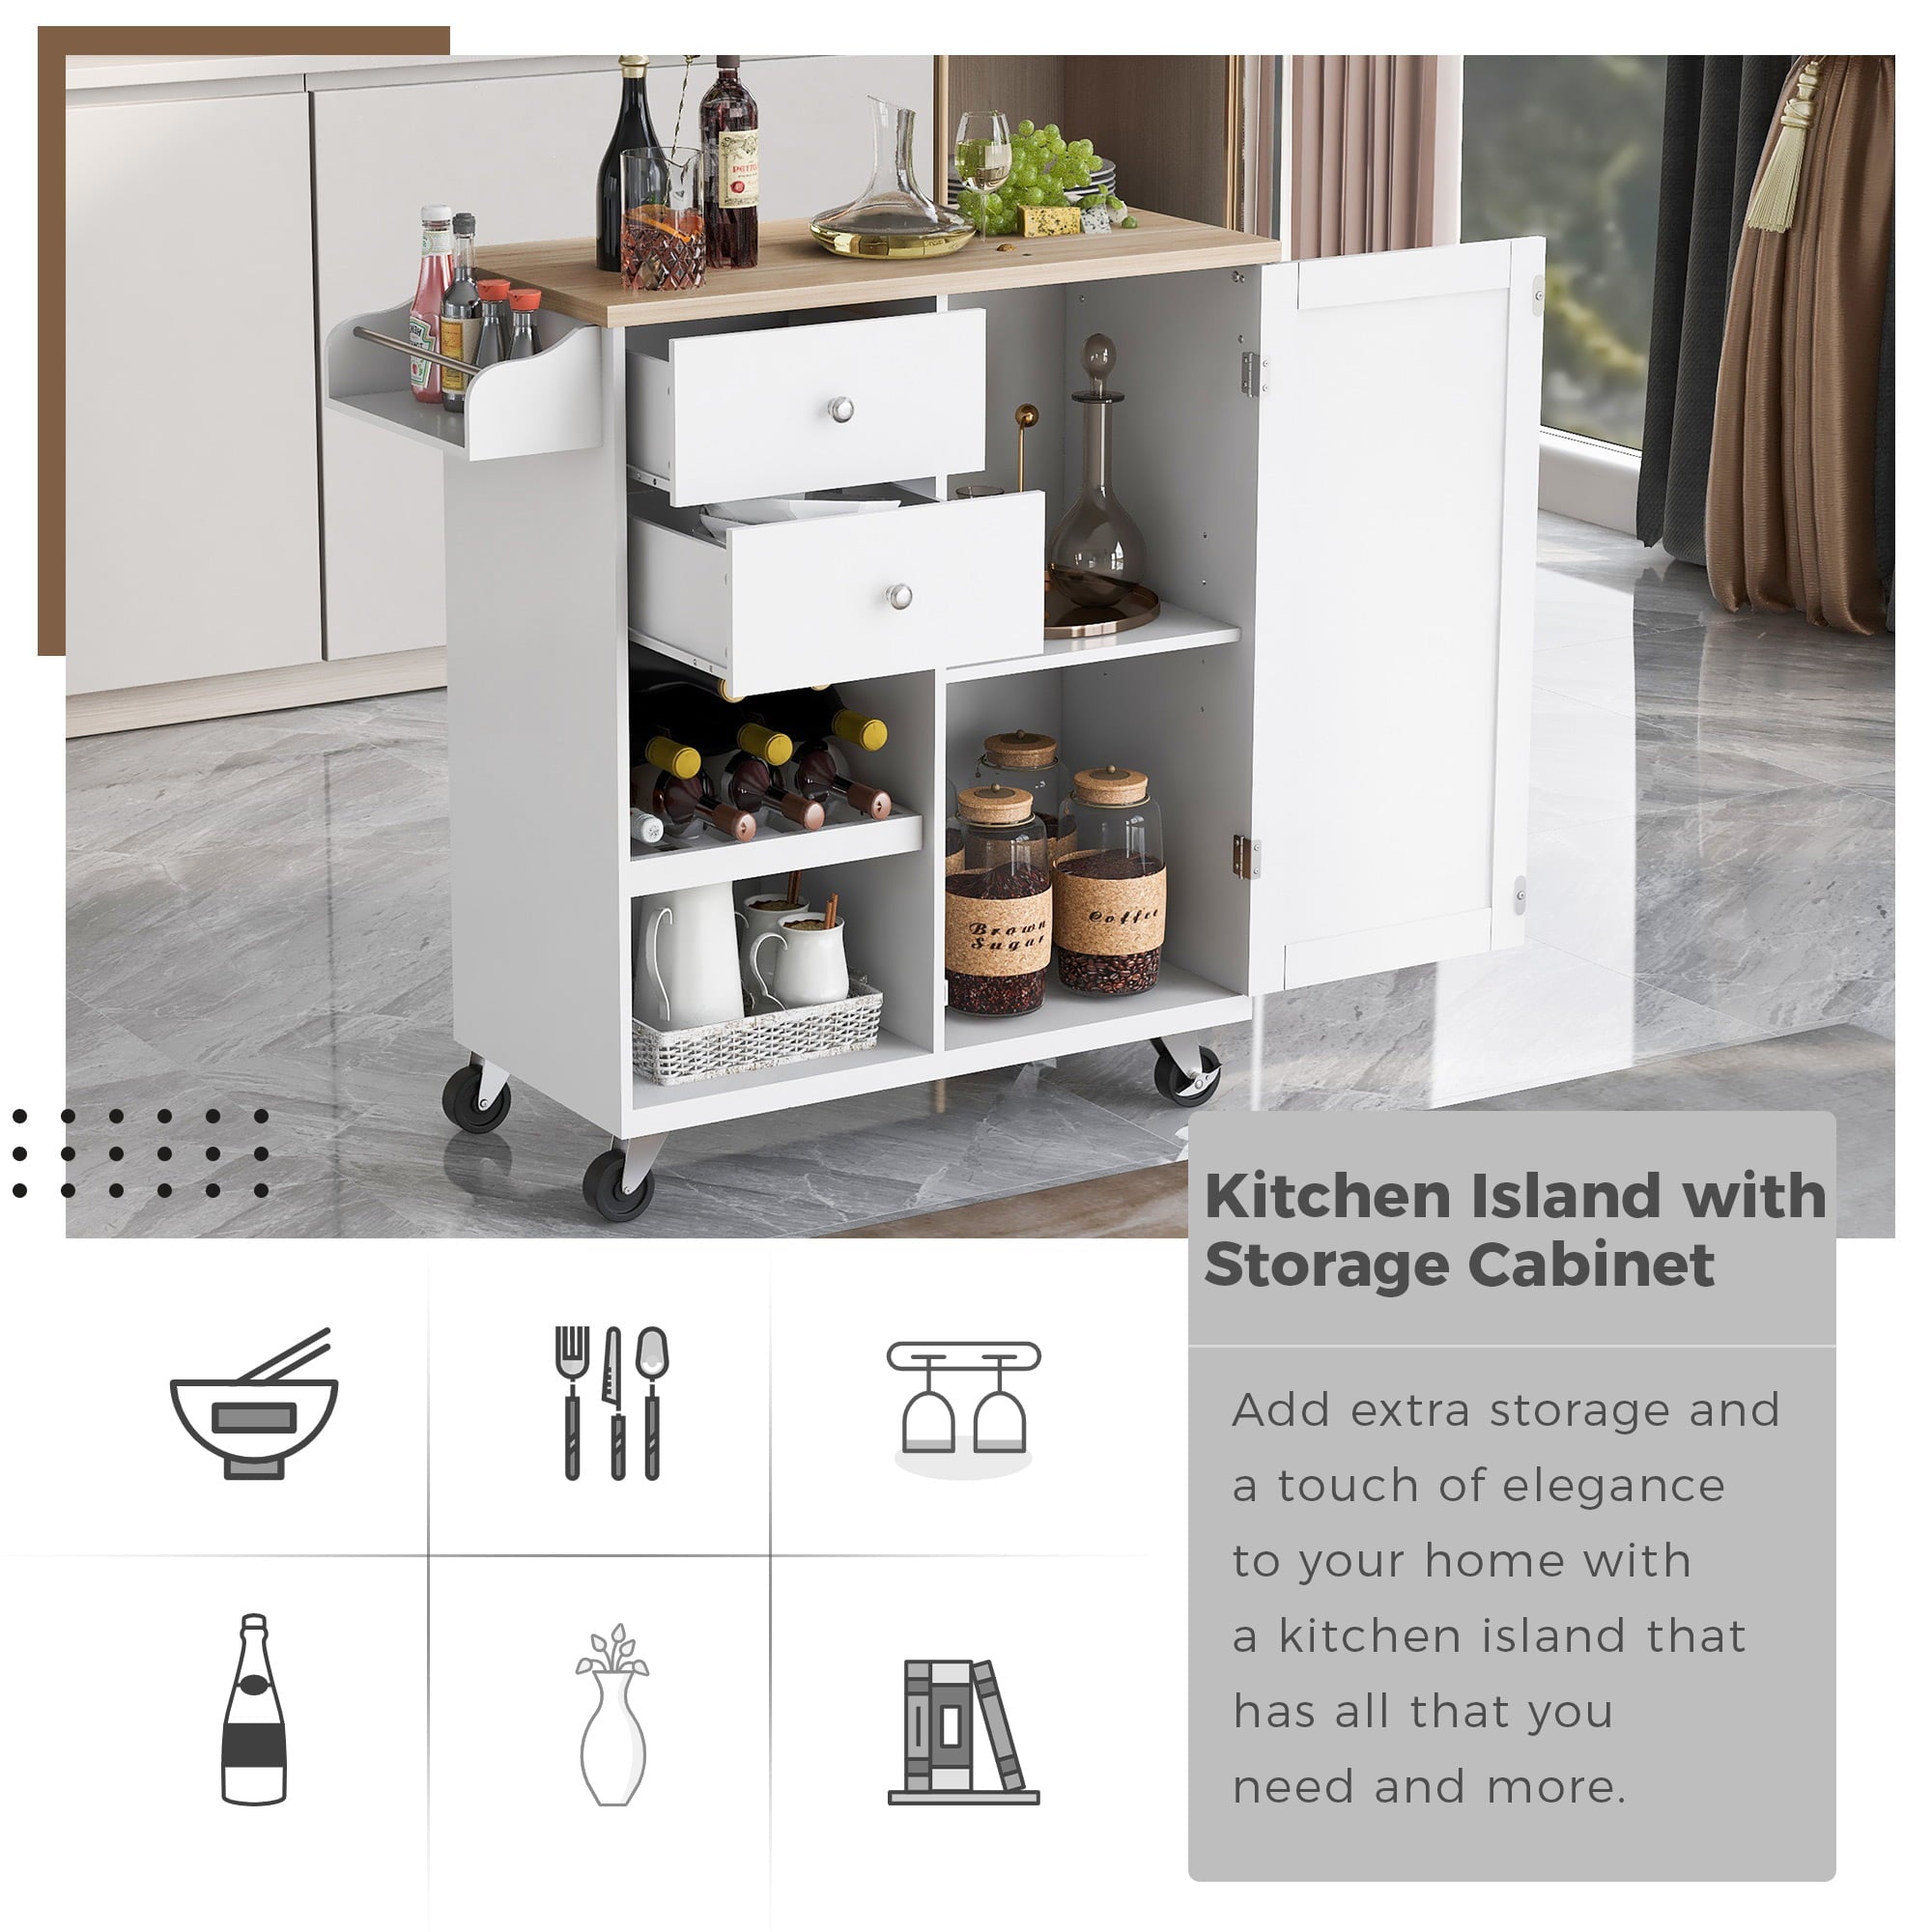 Hombay Modern Mobile Kitchen Island with Storage， Wood Kitchen Cart Organizer with Drawers Door Shelves and Spice Rack， 4 Wheels Rolling Lockable